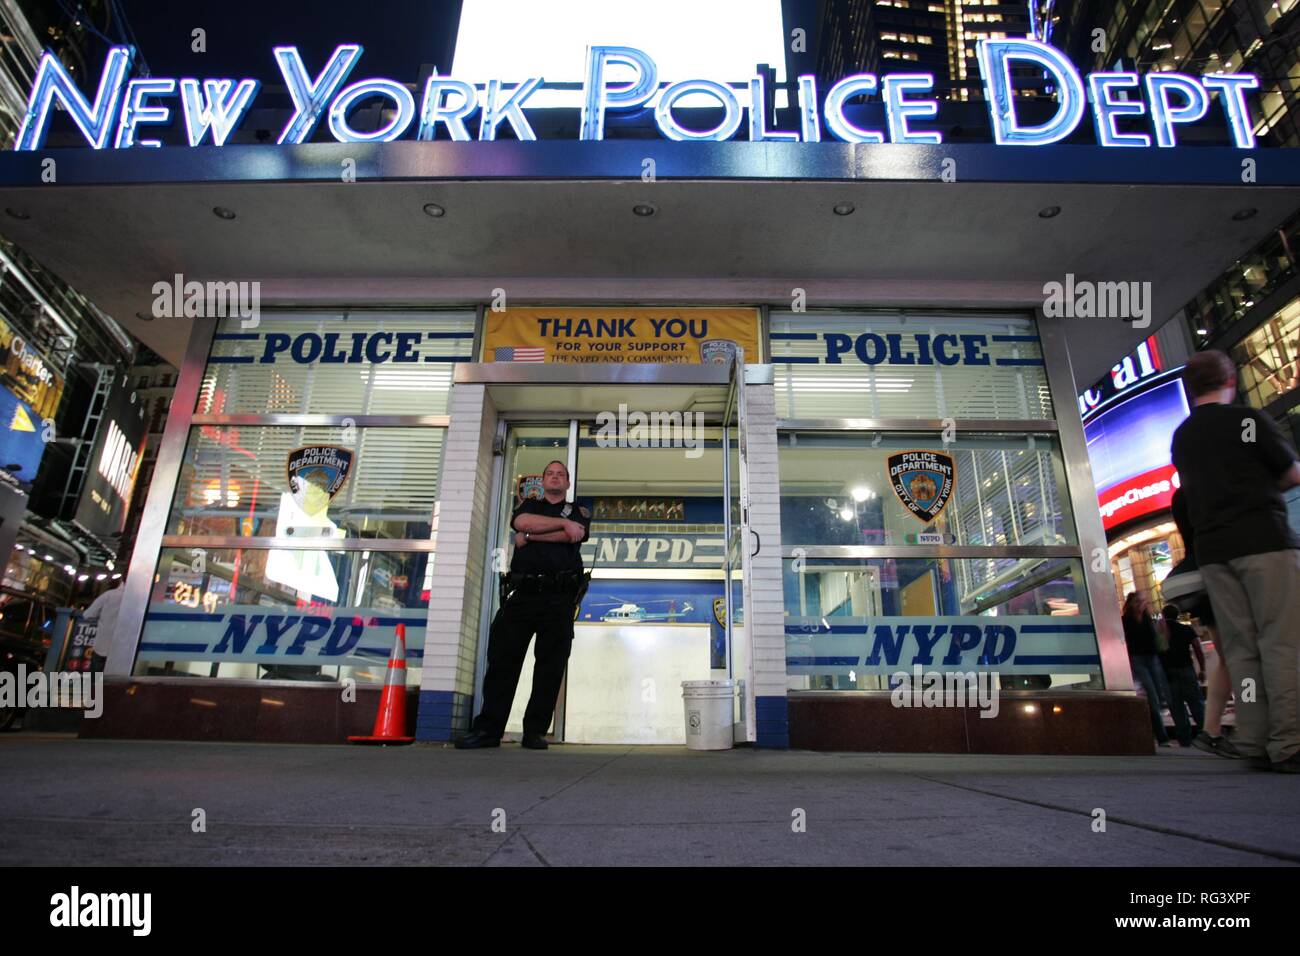 USA, United States of America, New York City: Times Square. Police station. Stock Photo